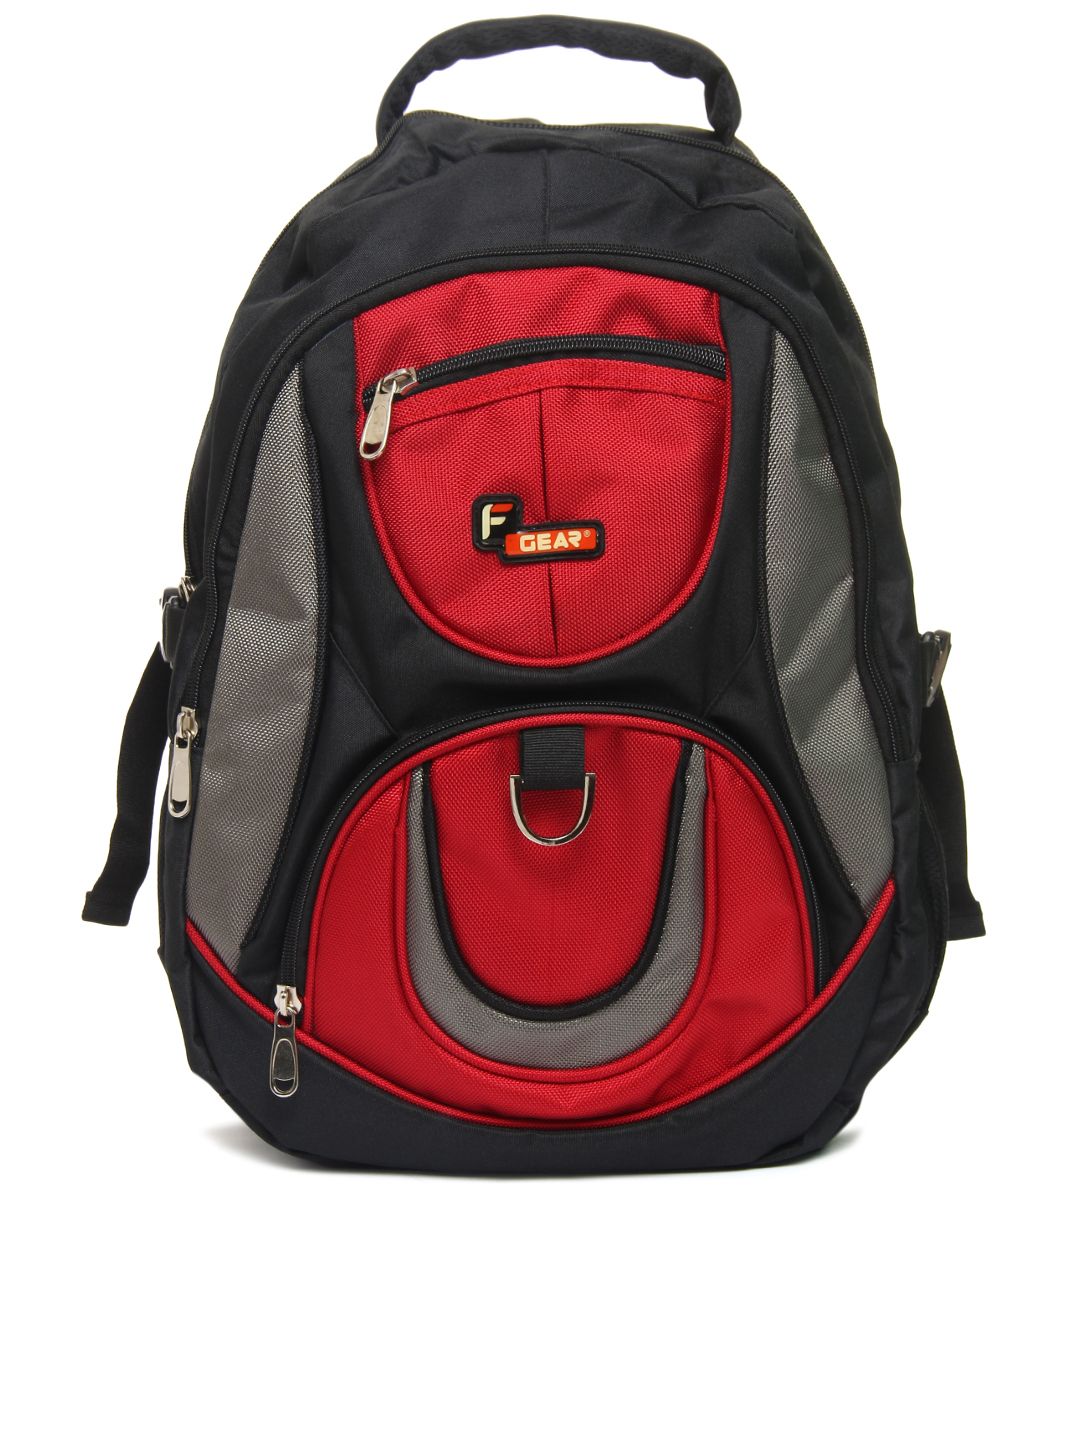 F Gear Unisex Black & Red Axe Backpack Price in India